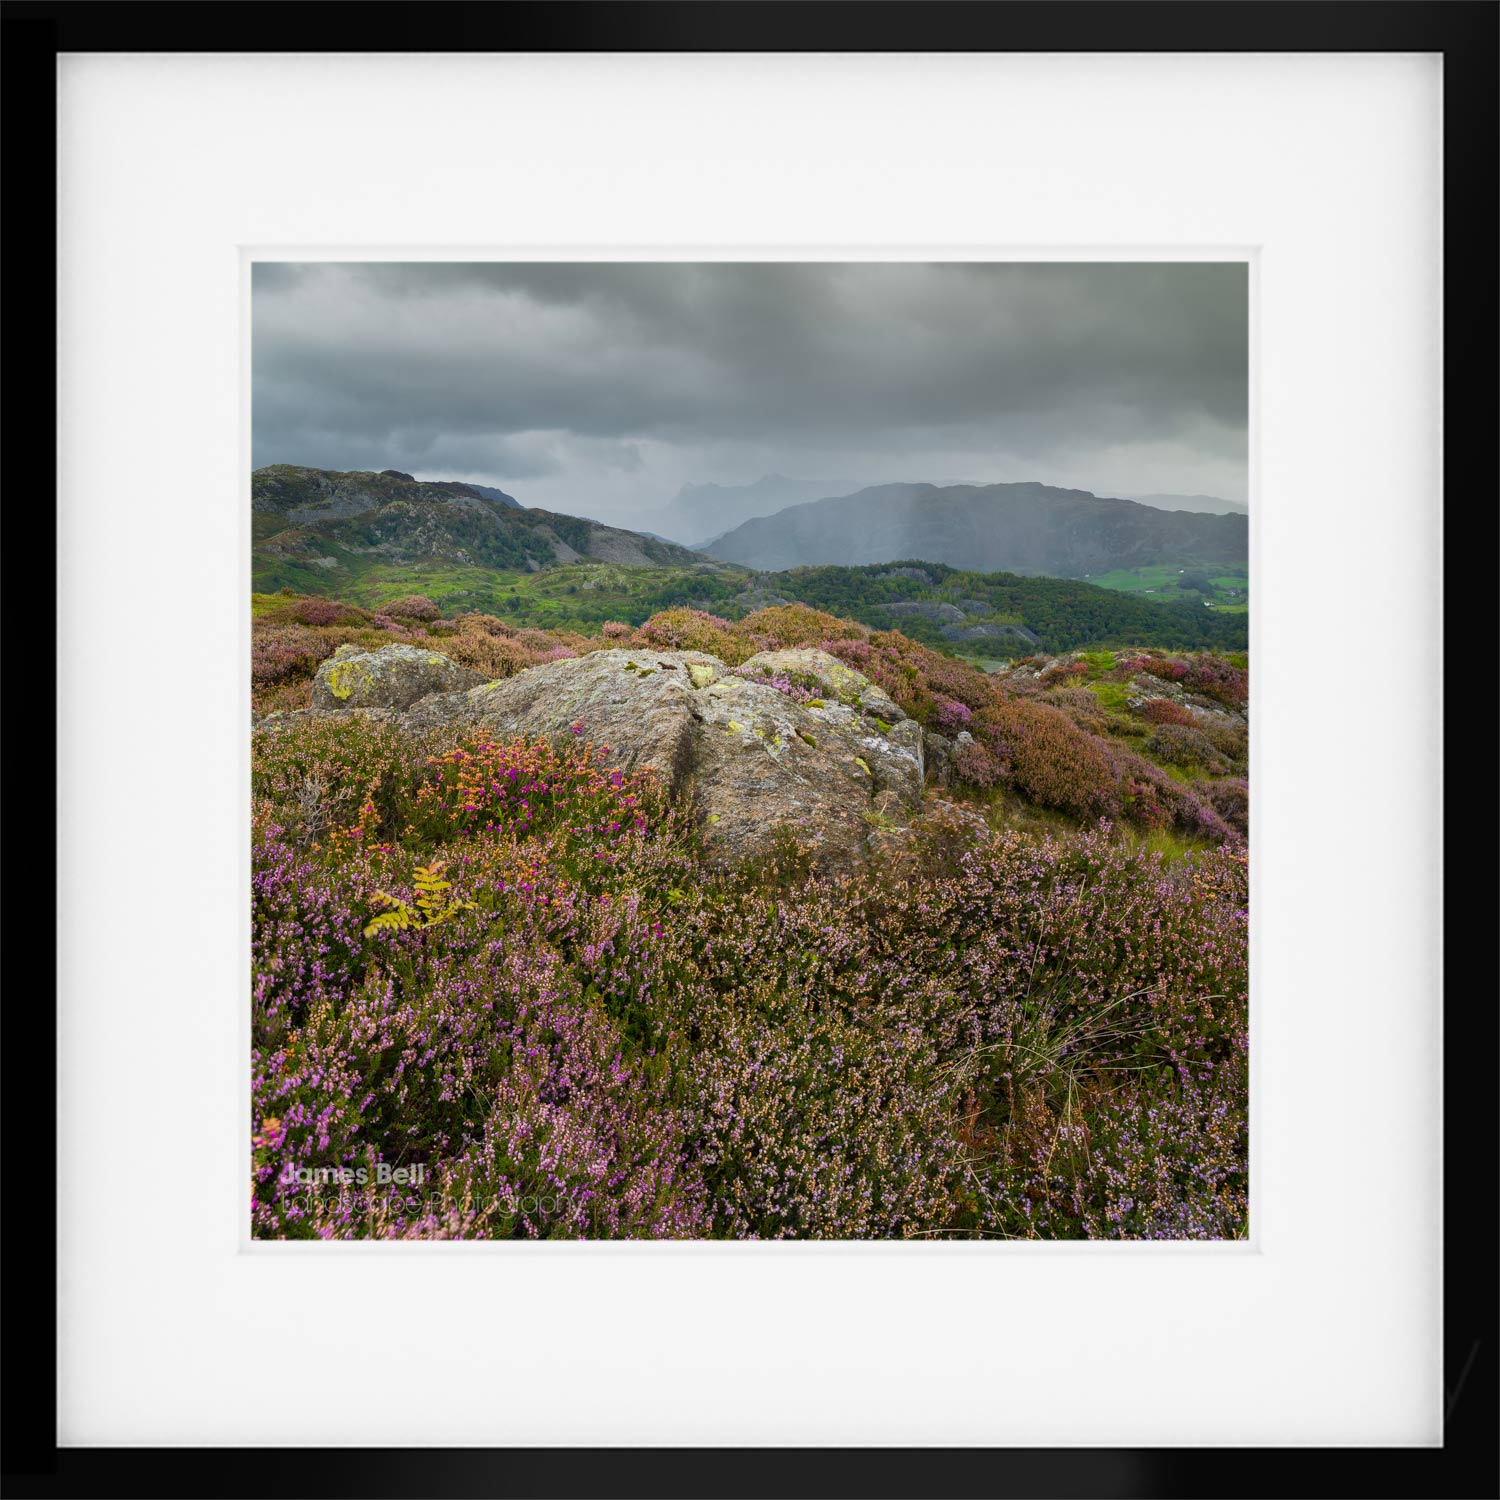 Photographing the lake district with the cambo actus-xcd